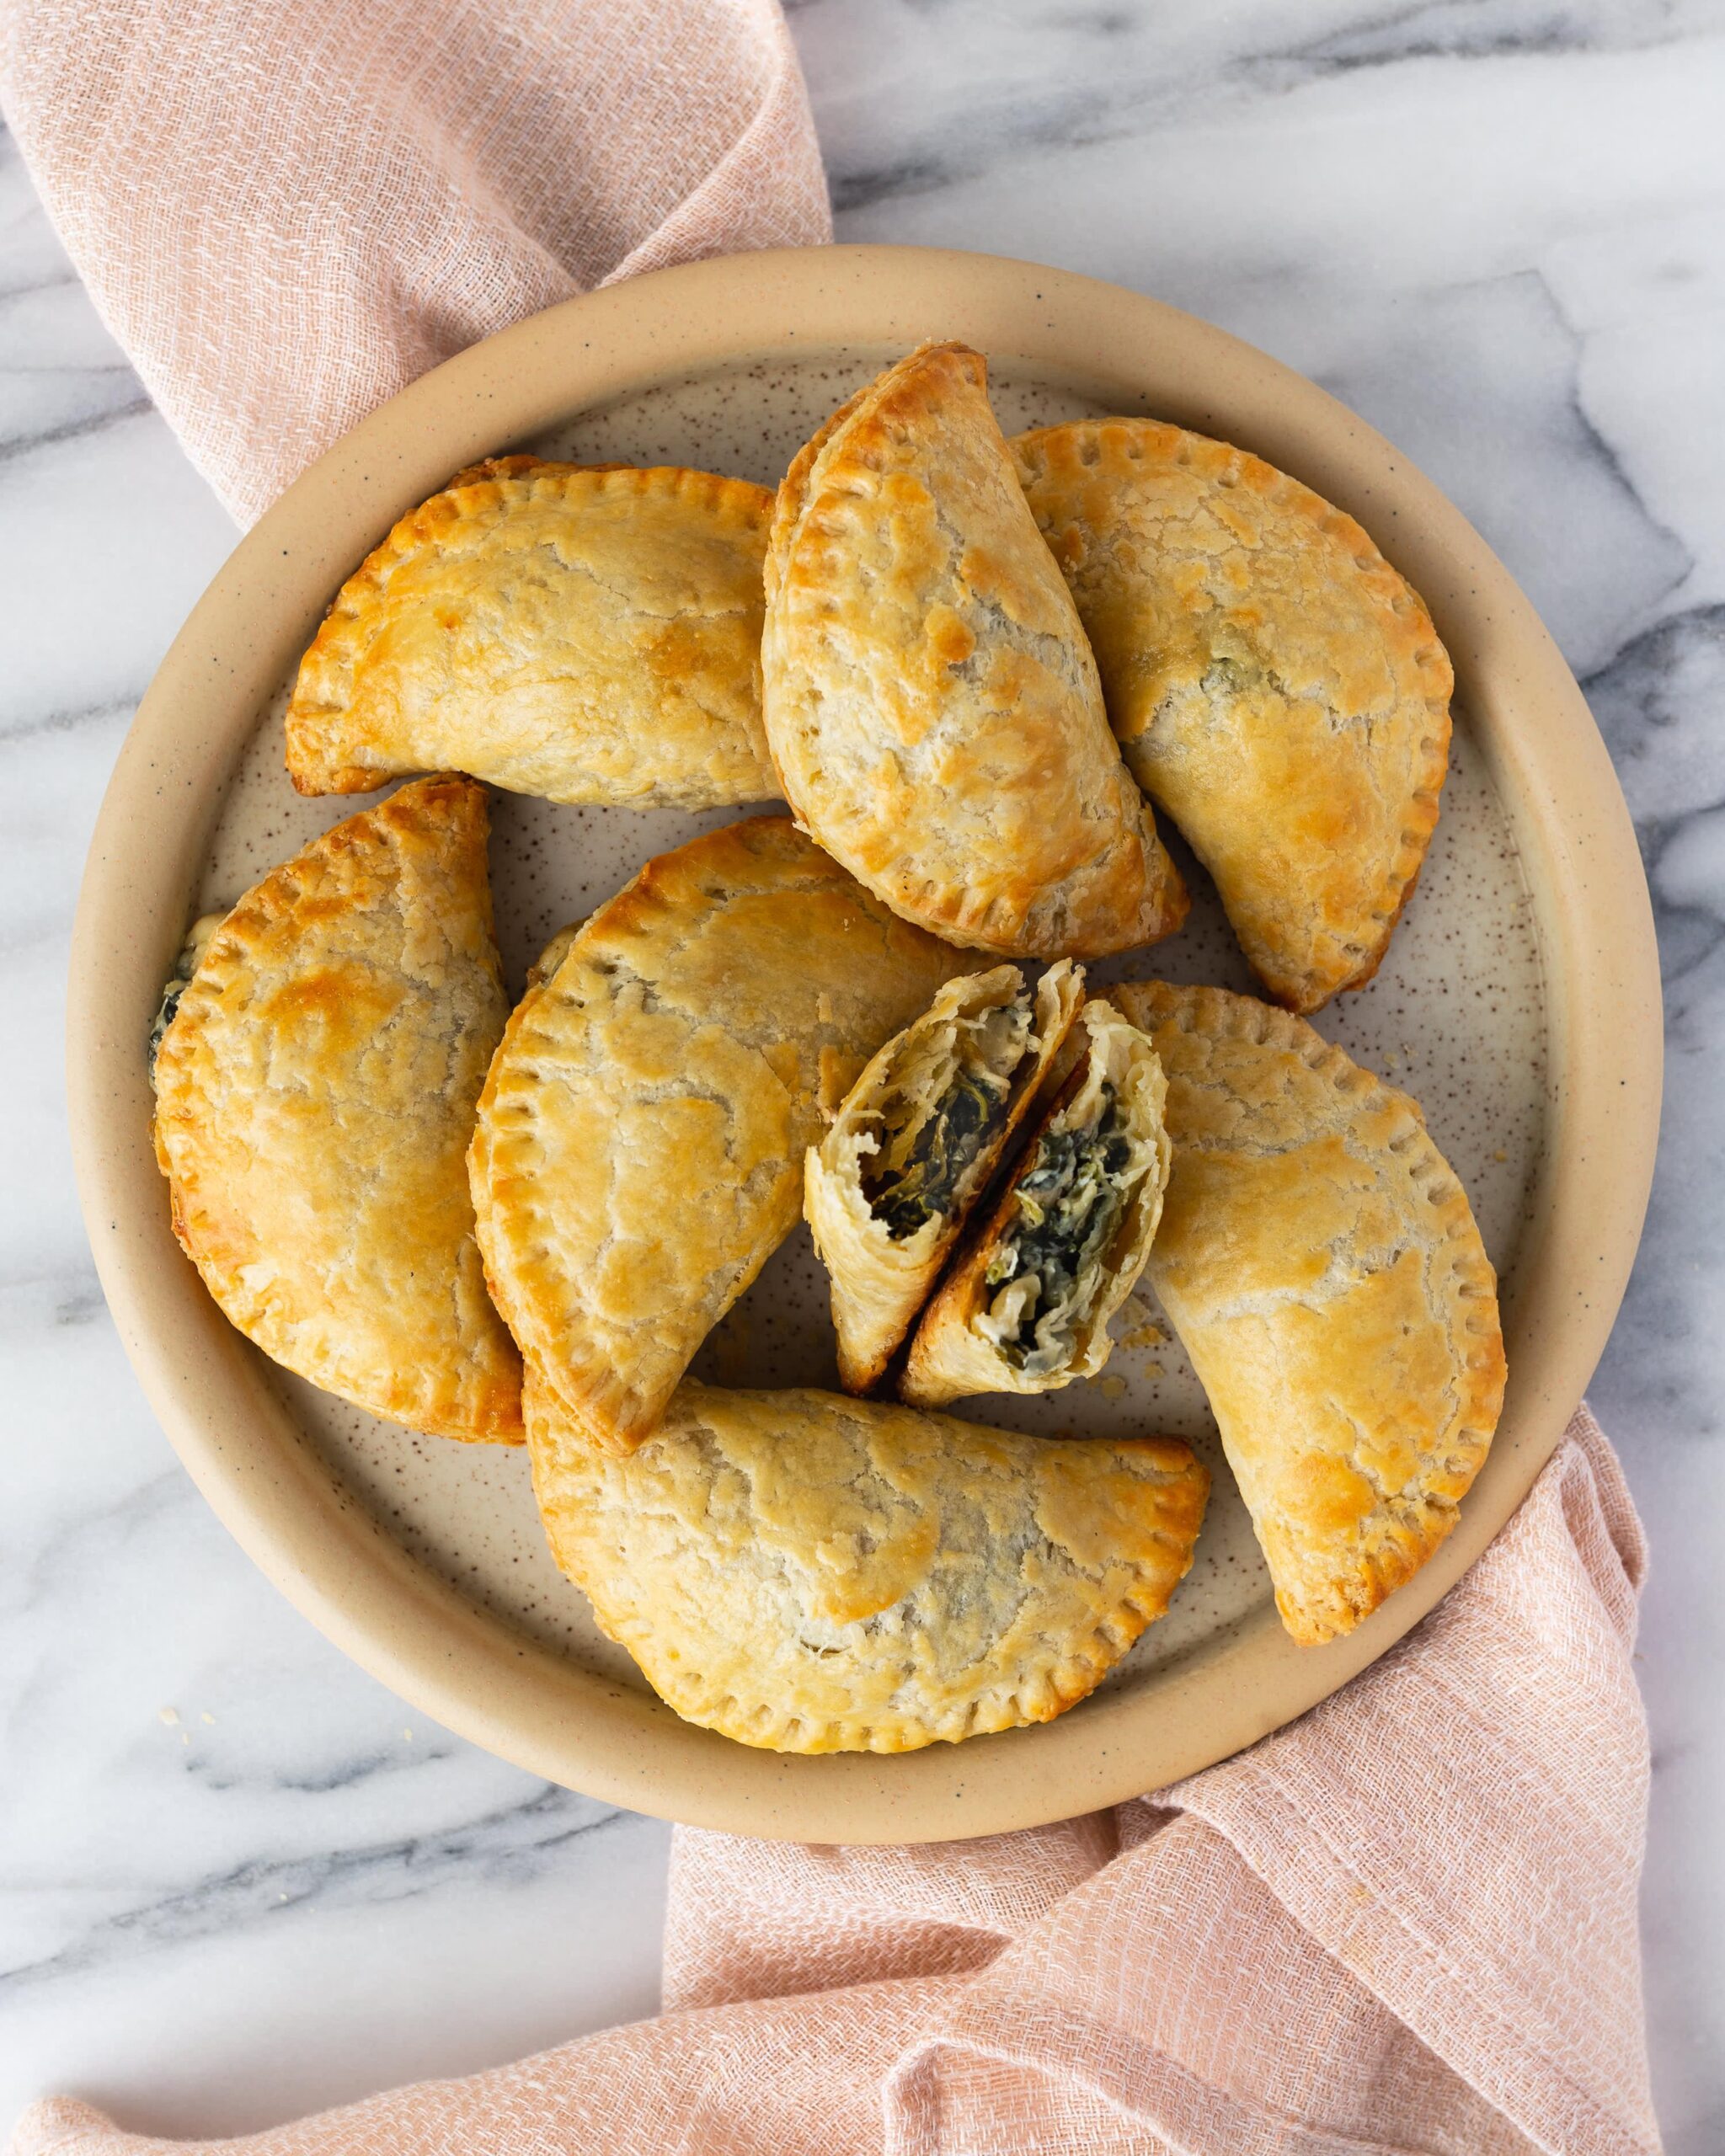  Perfectly stuffed and crisped Indian empanadas with spinach and potato filling.